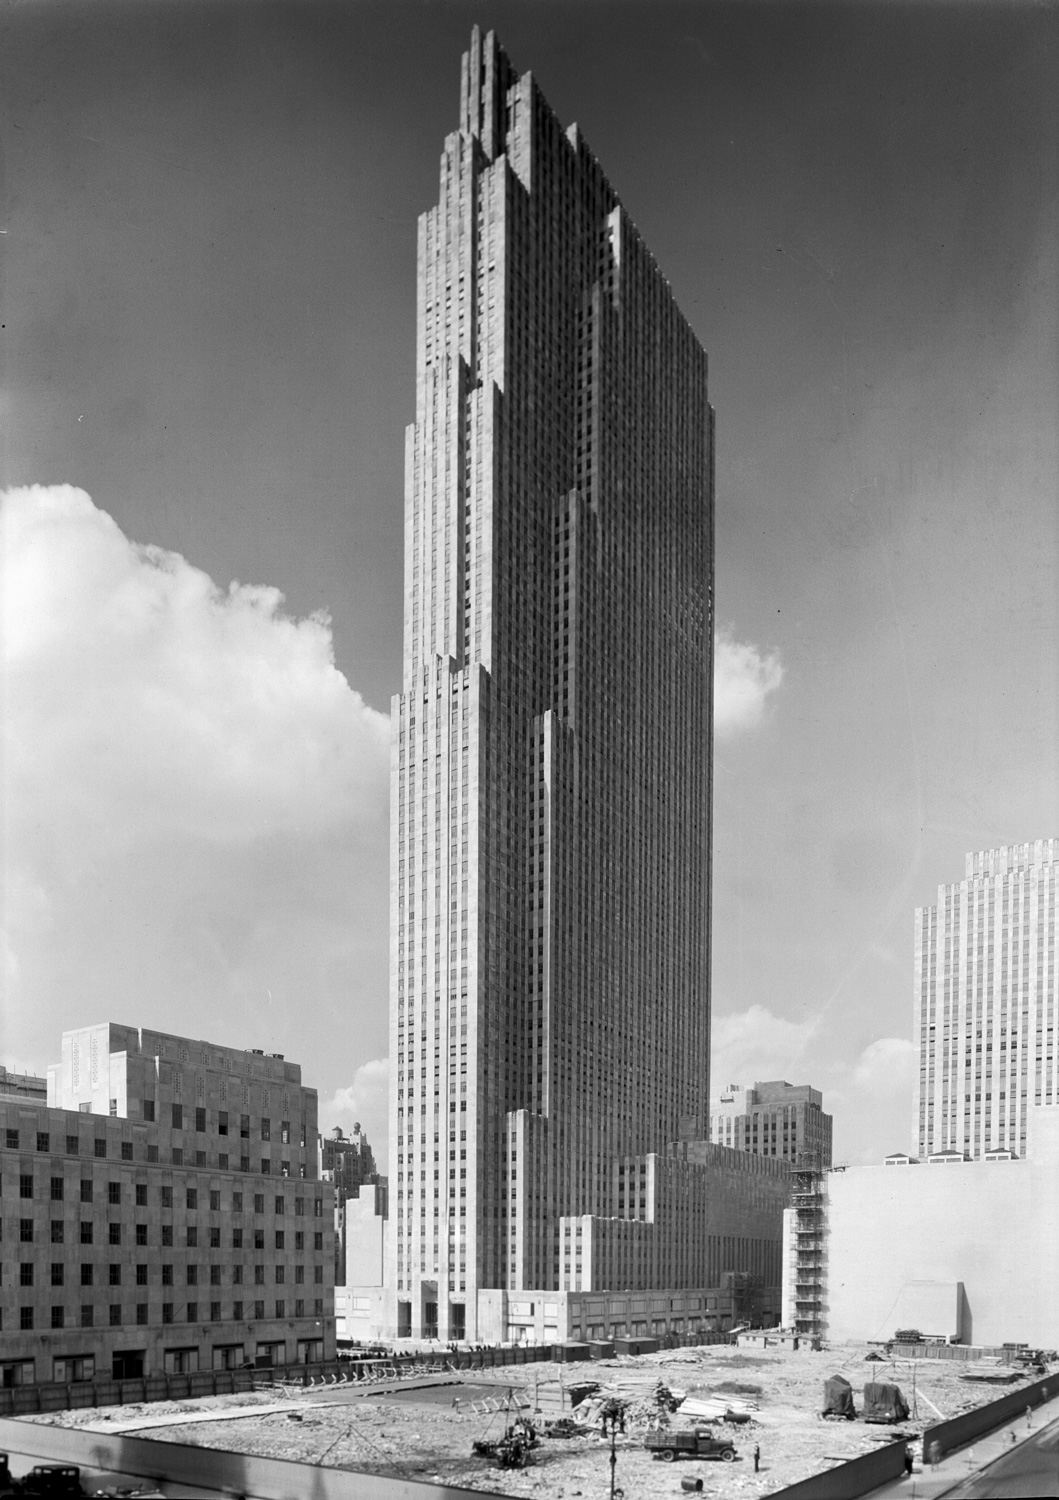 A black and white photograph of a skyscraper taken from an angle so two faces are visible. One face is very narrow and the over face is very wide. The slab-like building has several minimal setbacks and is mostly unornamented. It is made of a light-colored stone. A large plot of land between the camera and the skyscraper has been cleared. On it are some workers and a truck ready to begin additional construction.